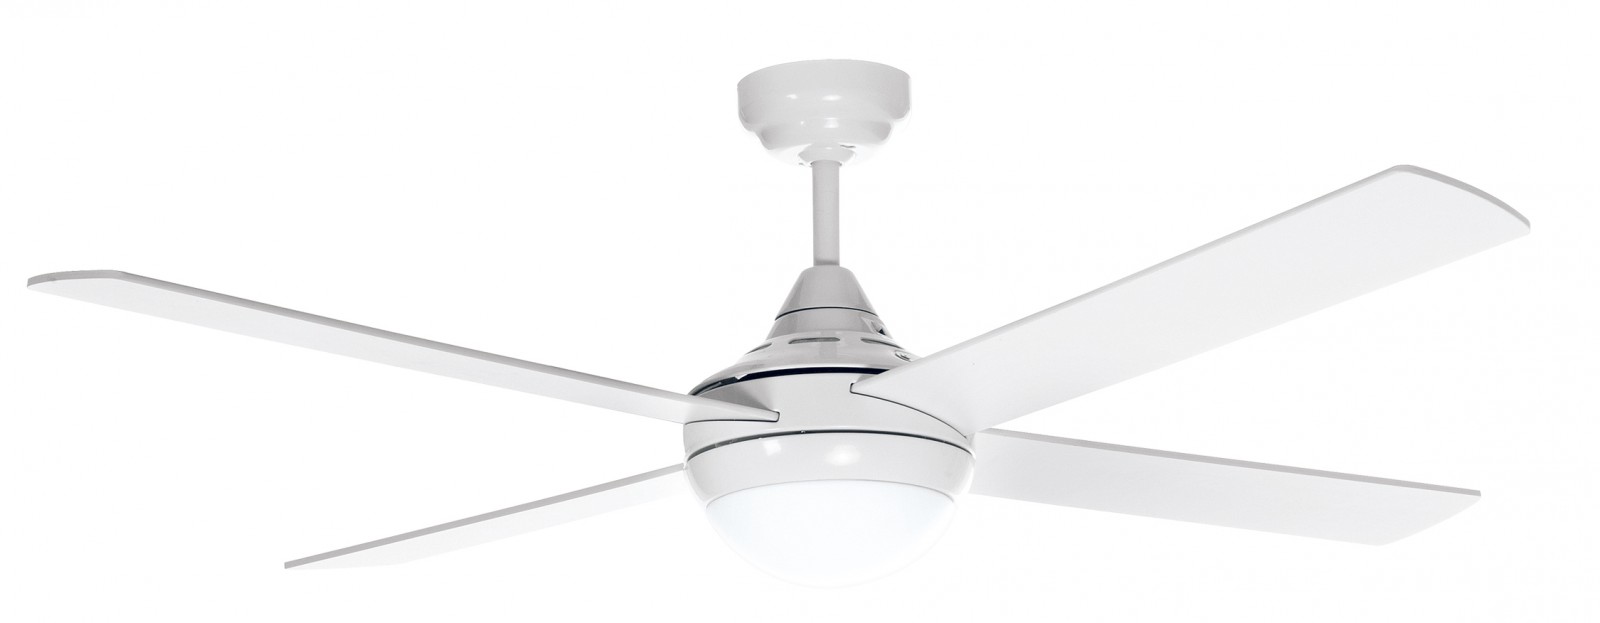 lucci futura ceiling fan with remote instructions